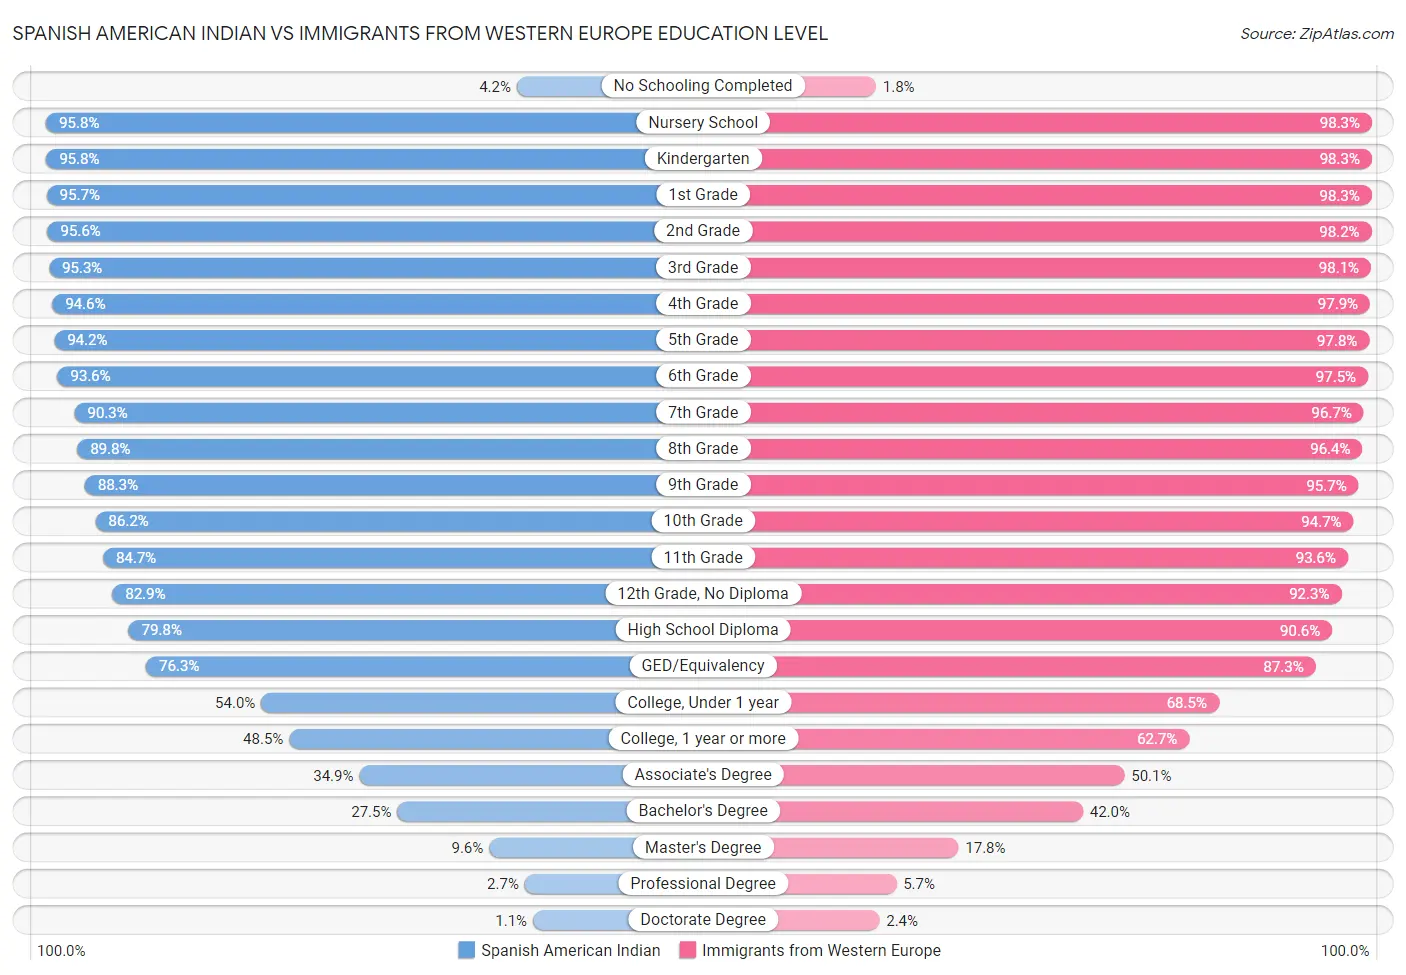 Spanish American Indian vs Immigrants from Western Europe Education Level